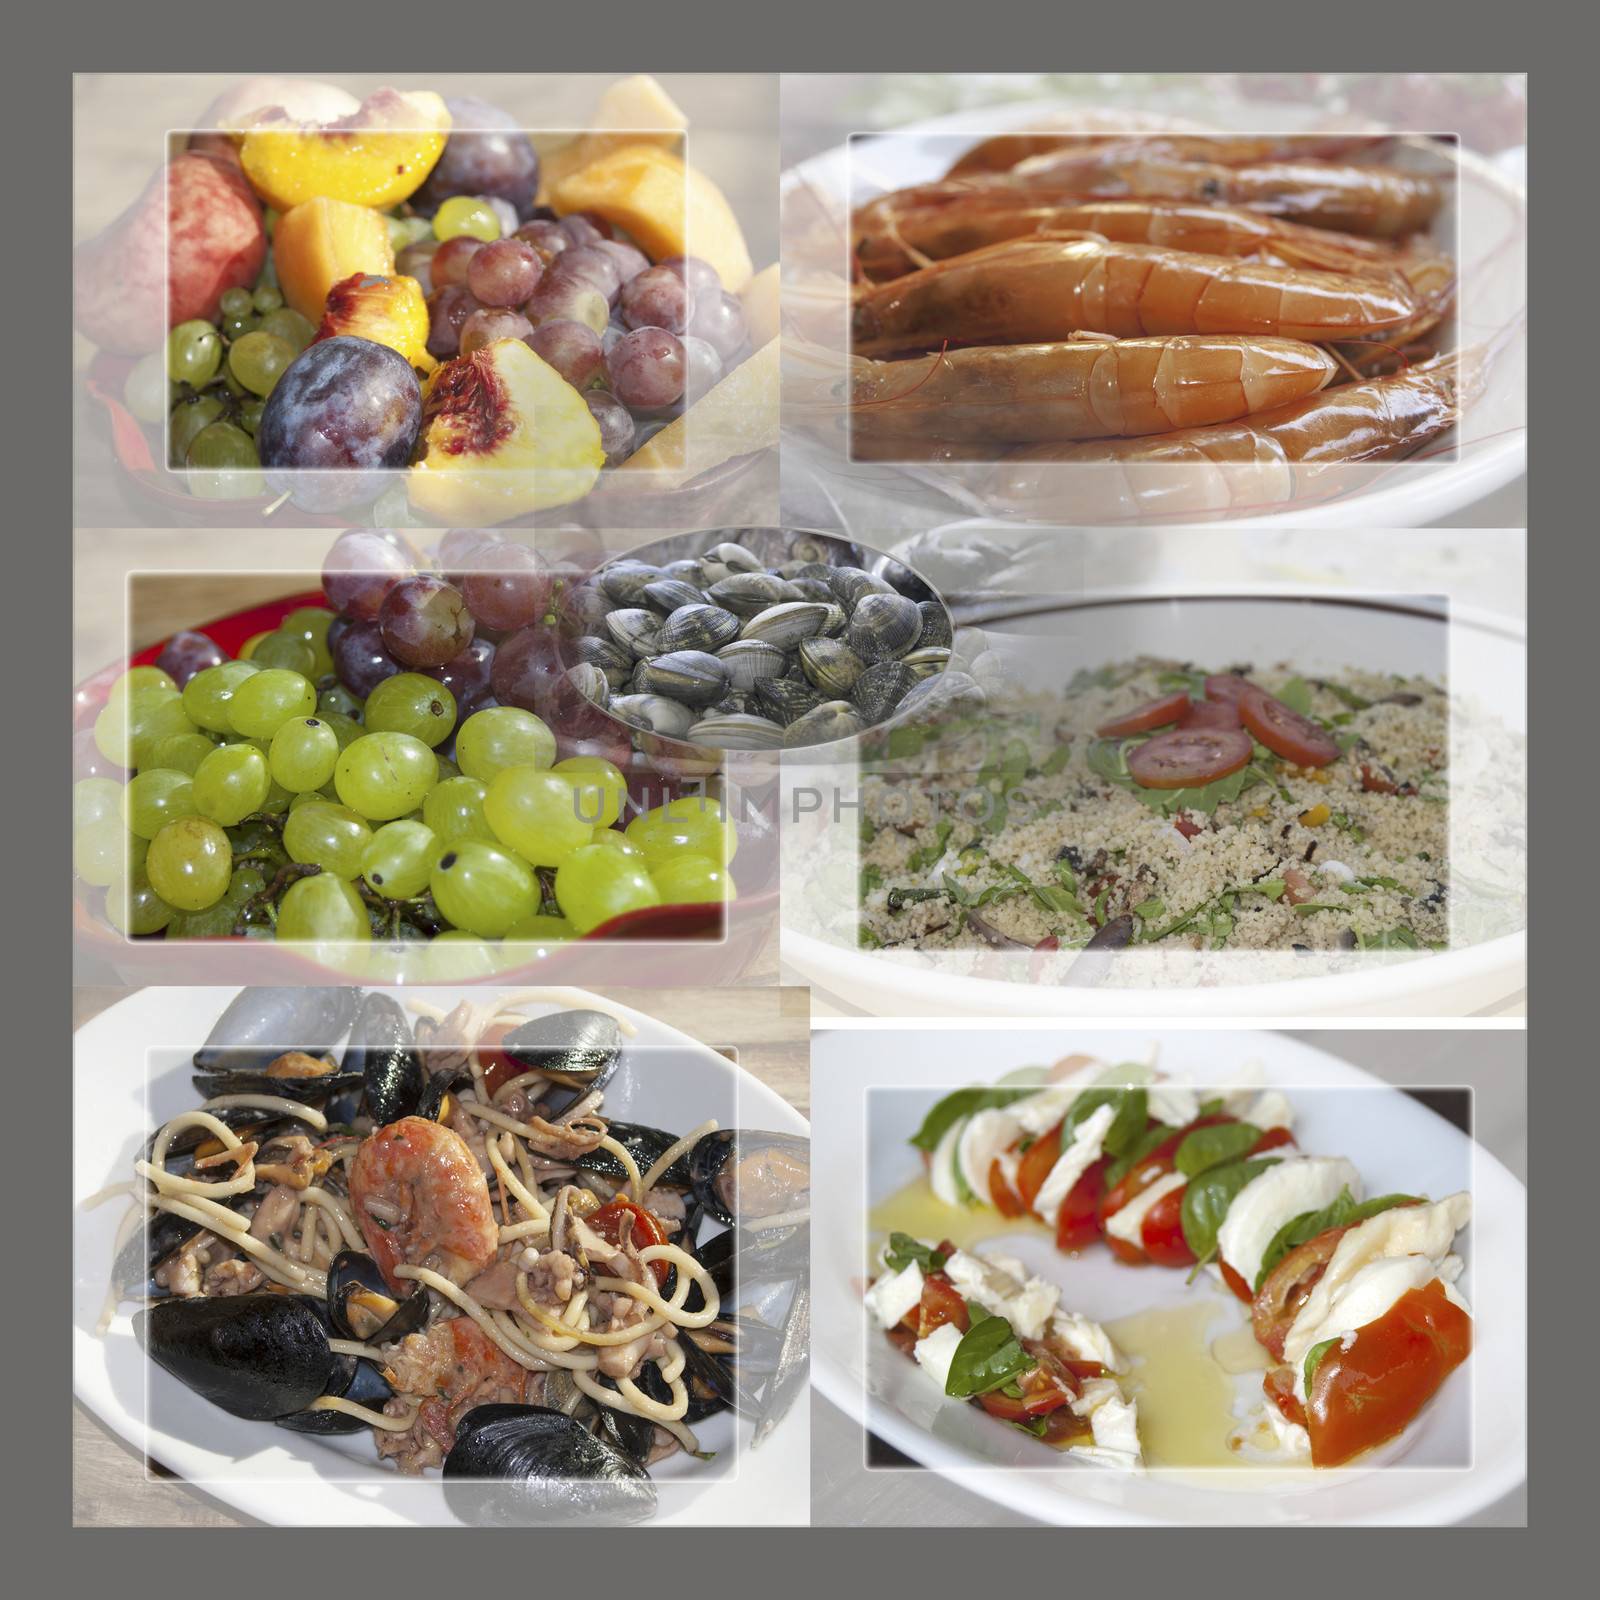 some typical food of the mediterranean diet